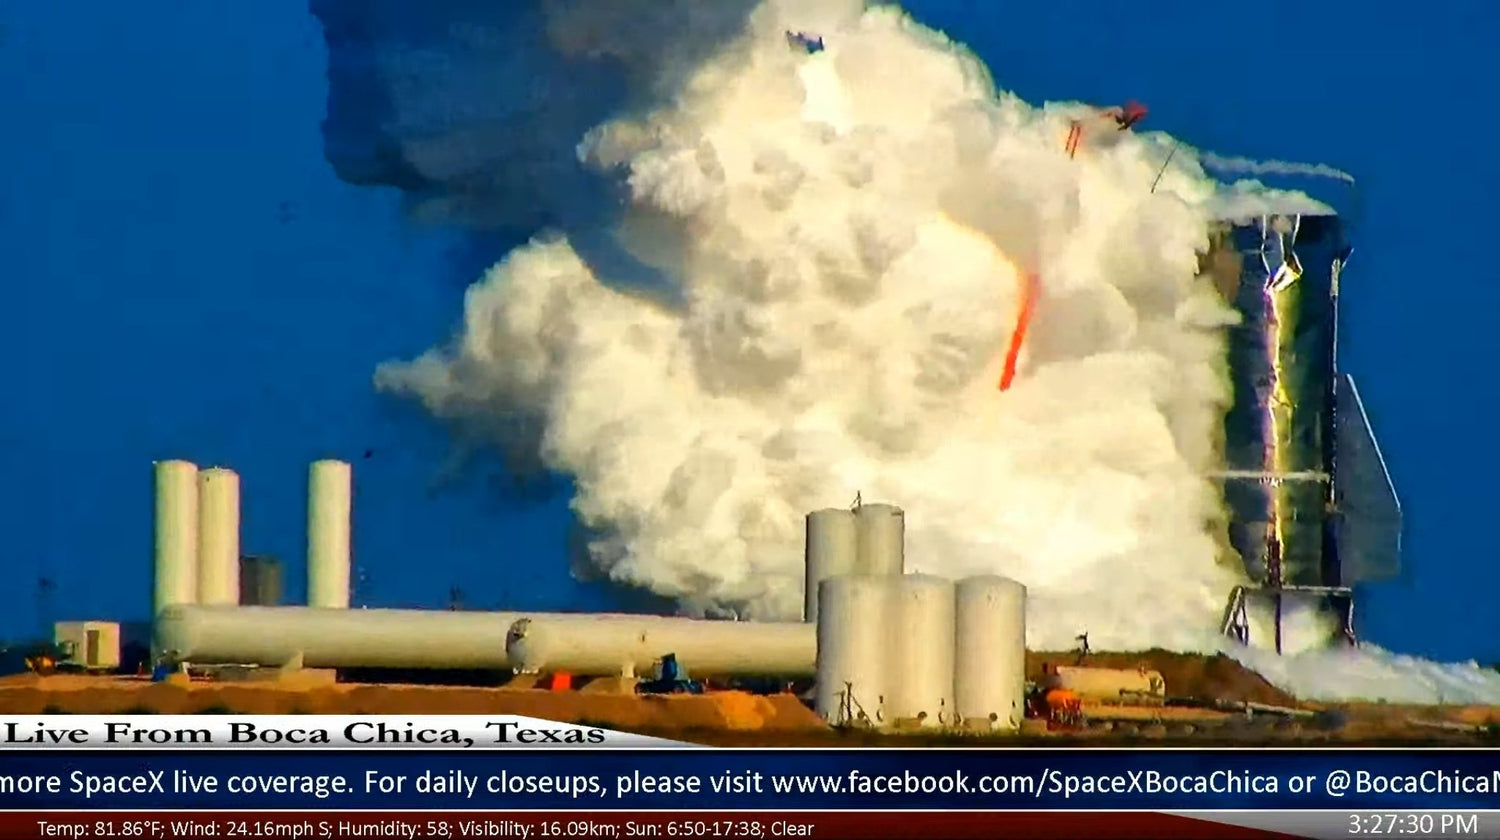 SpaceX Starship Mk1 tests in Boca Chica Texas